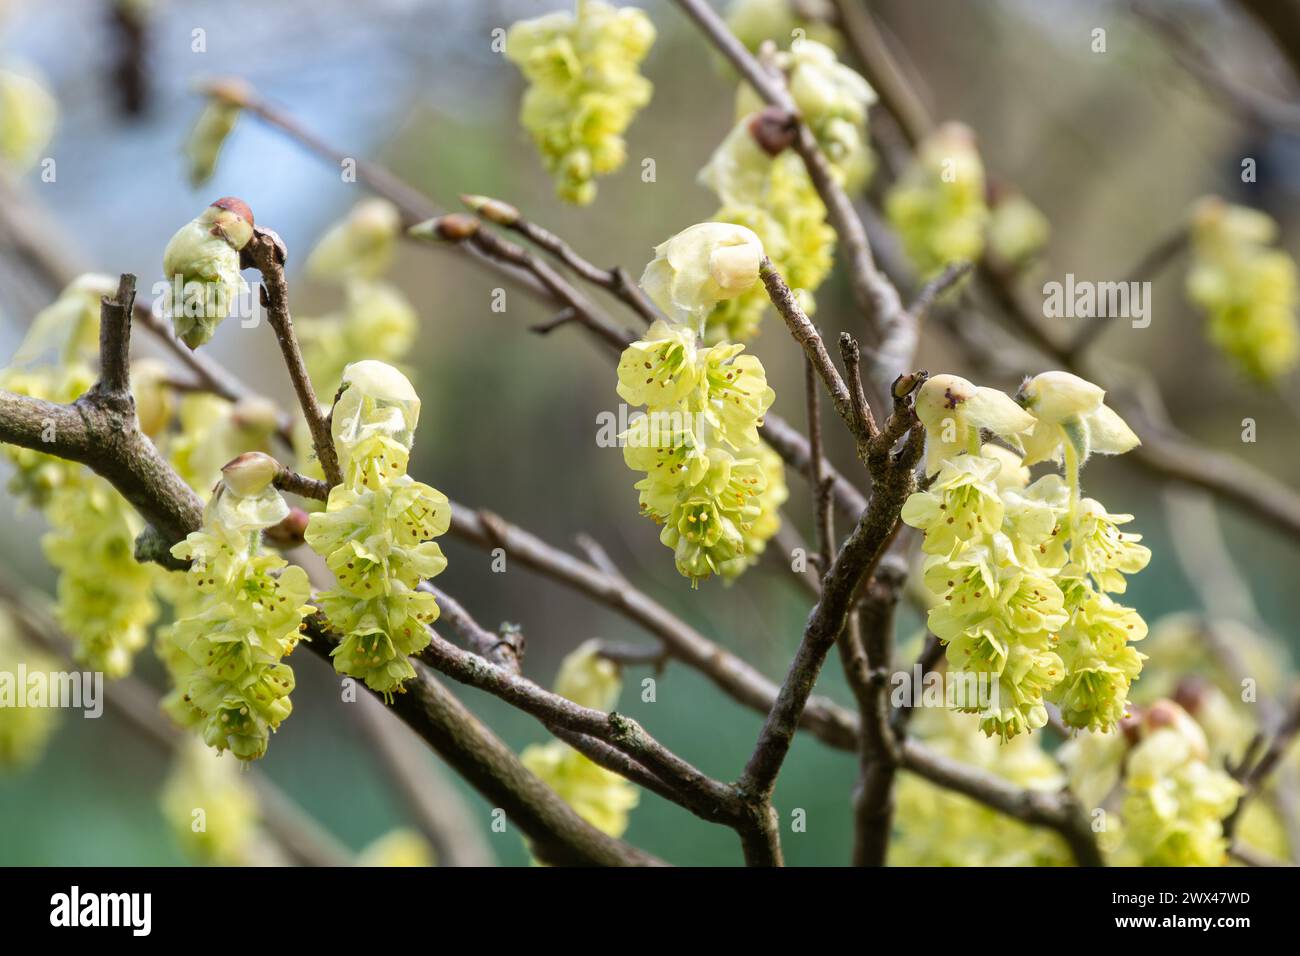 Corylopsis sinensis var sinensis, Chinese winter hazel, light yellow flowers or racemes on the shrub during spring or March, Hampshire, England, UK Stock Photo